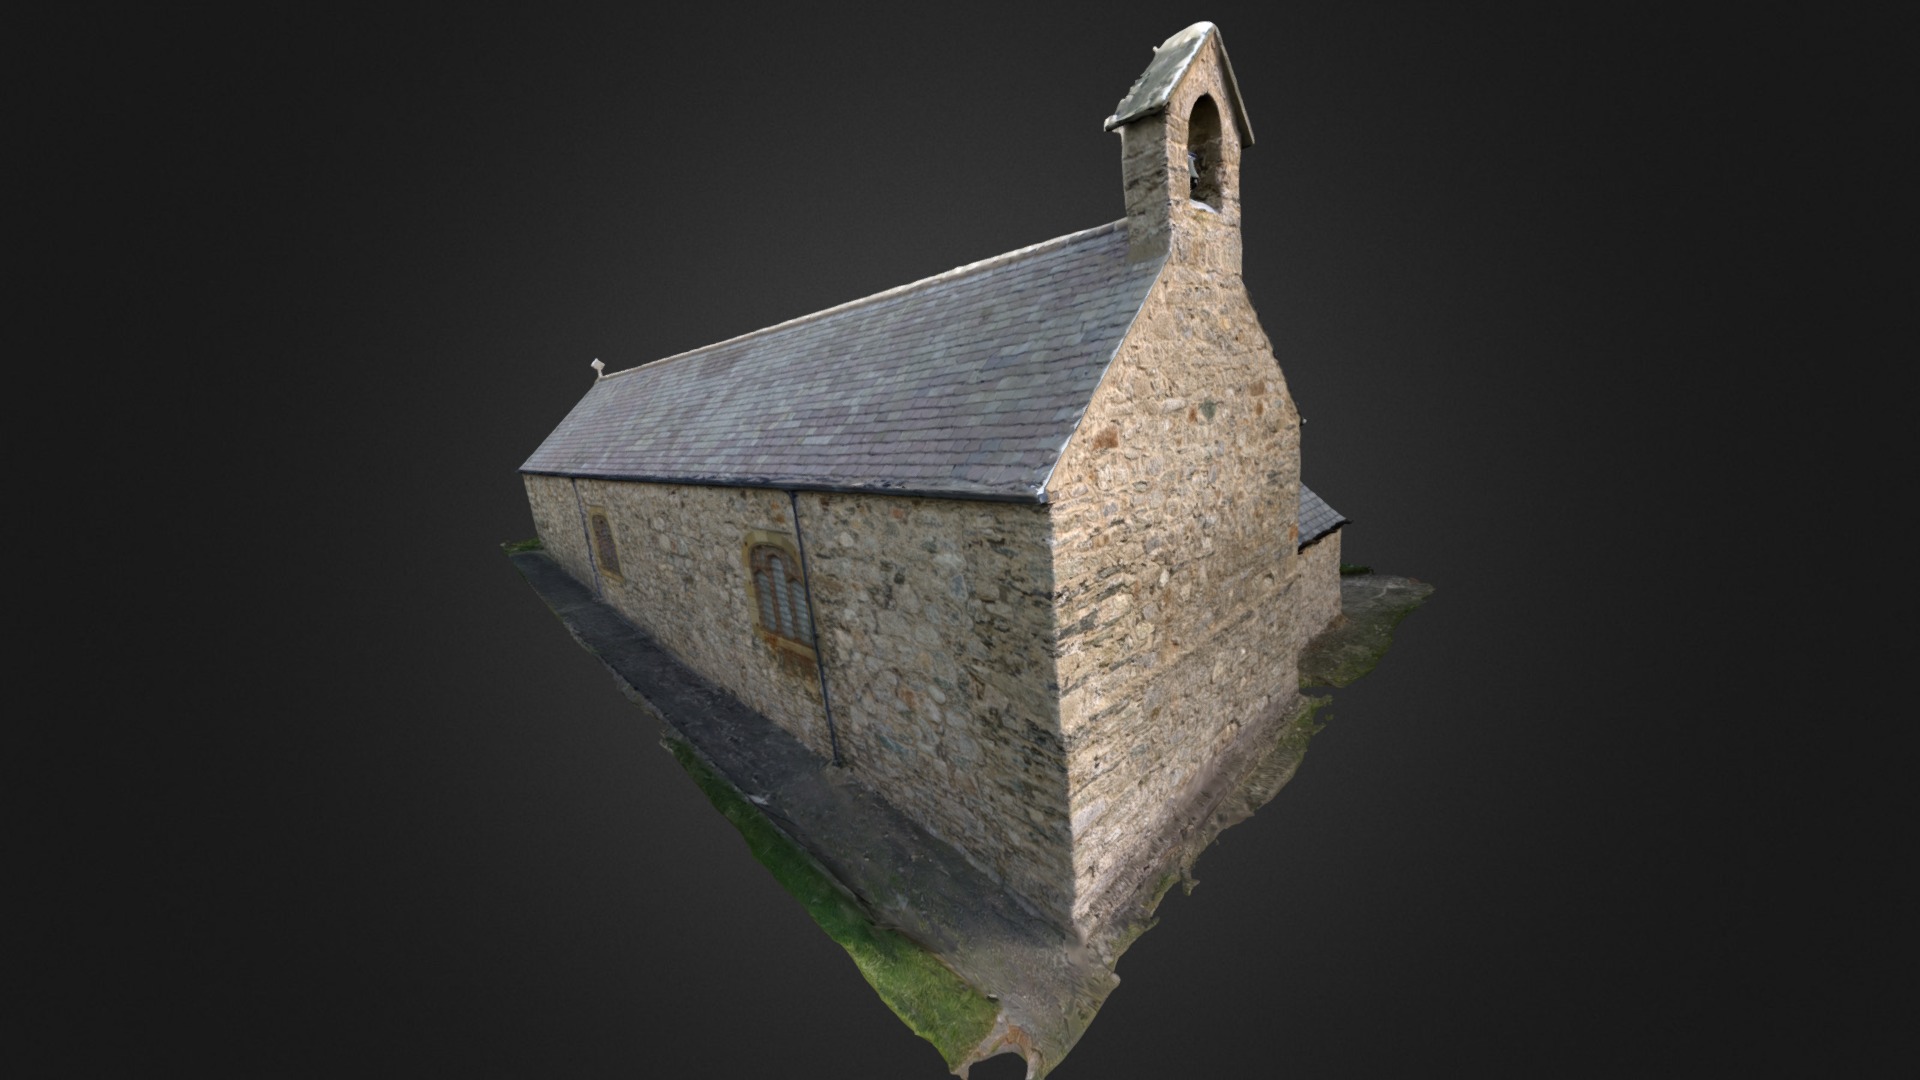 3D model Llanbadrig Church - This is a 3D model of the Llanbadrig Church. The 3D model is about a stone castle on a black background.